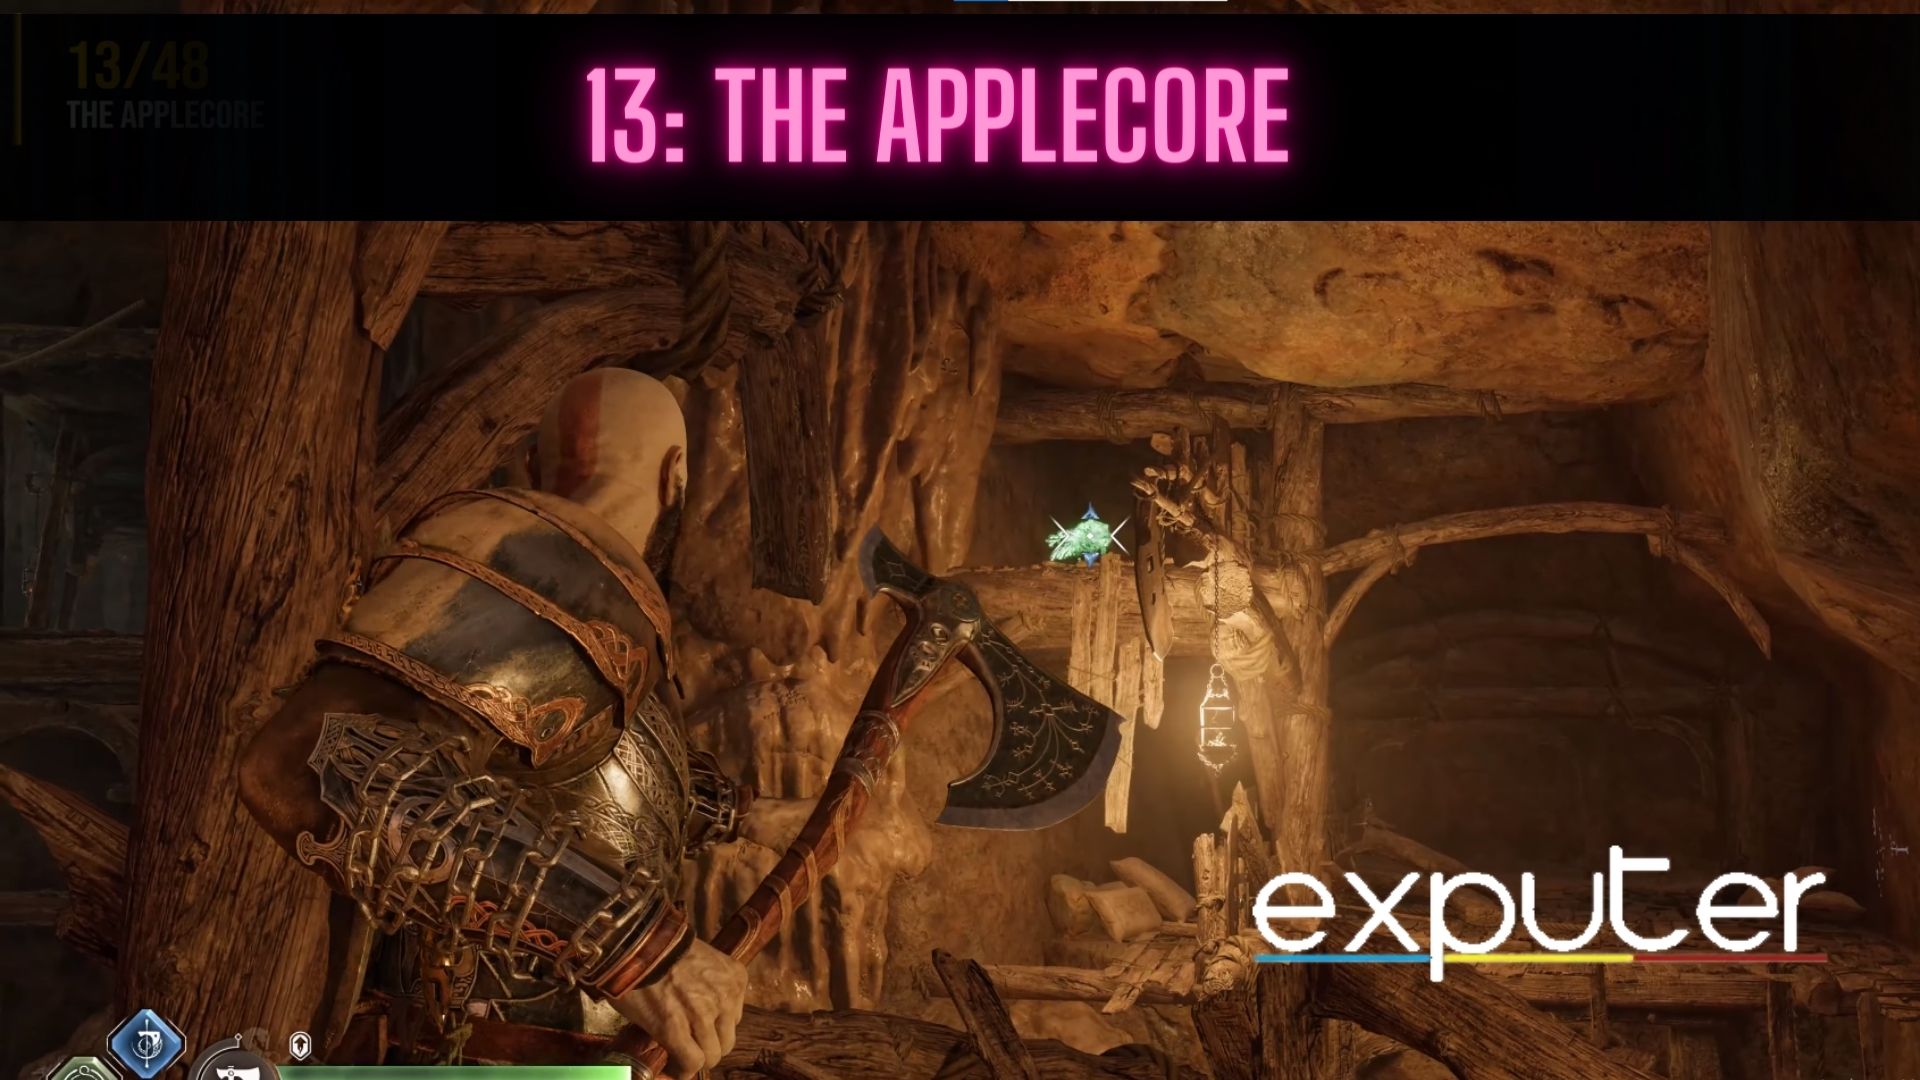 The Applecore In GOWR